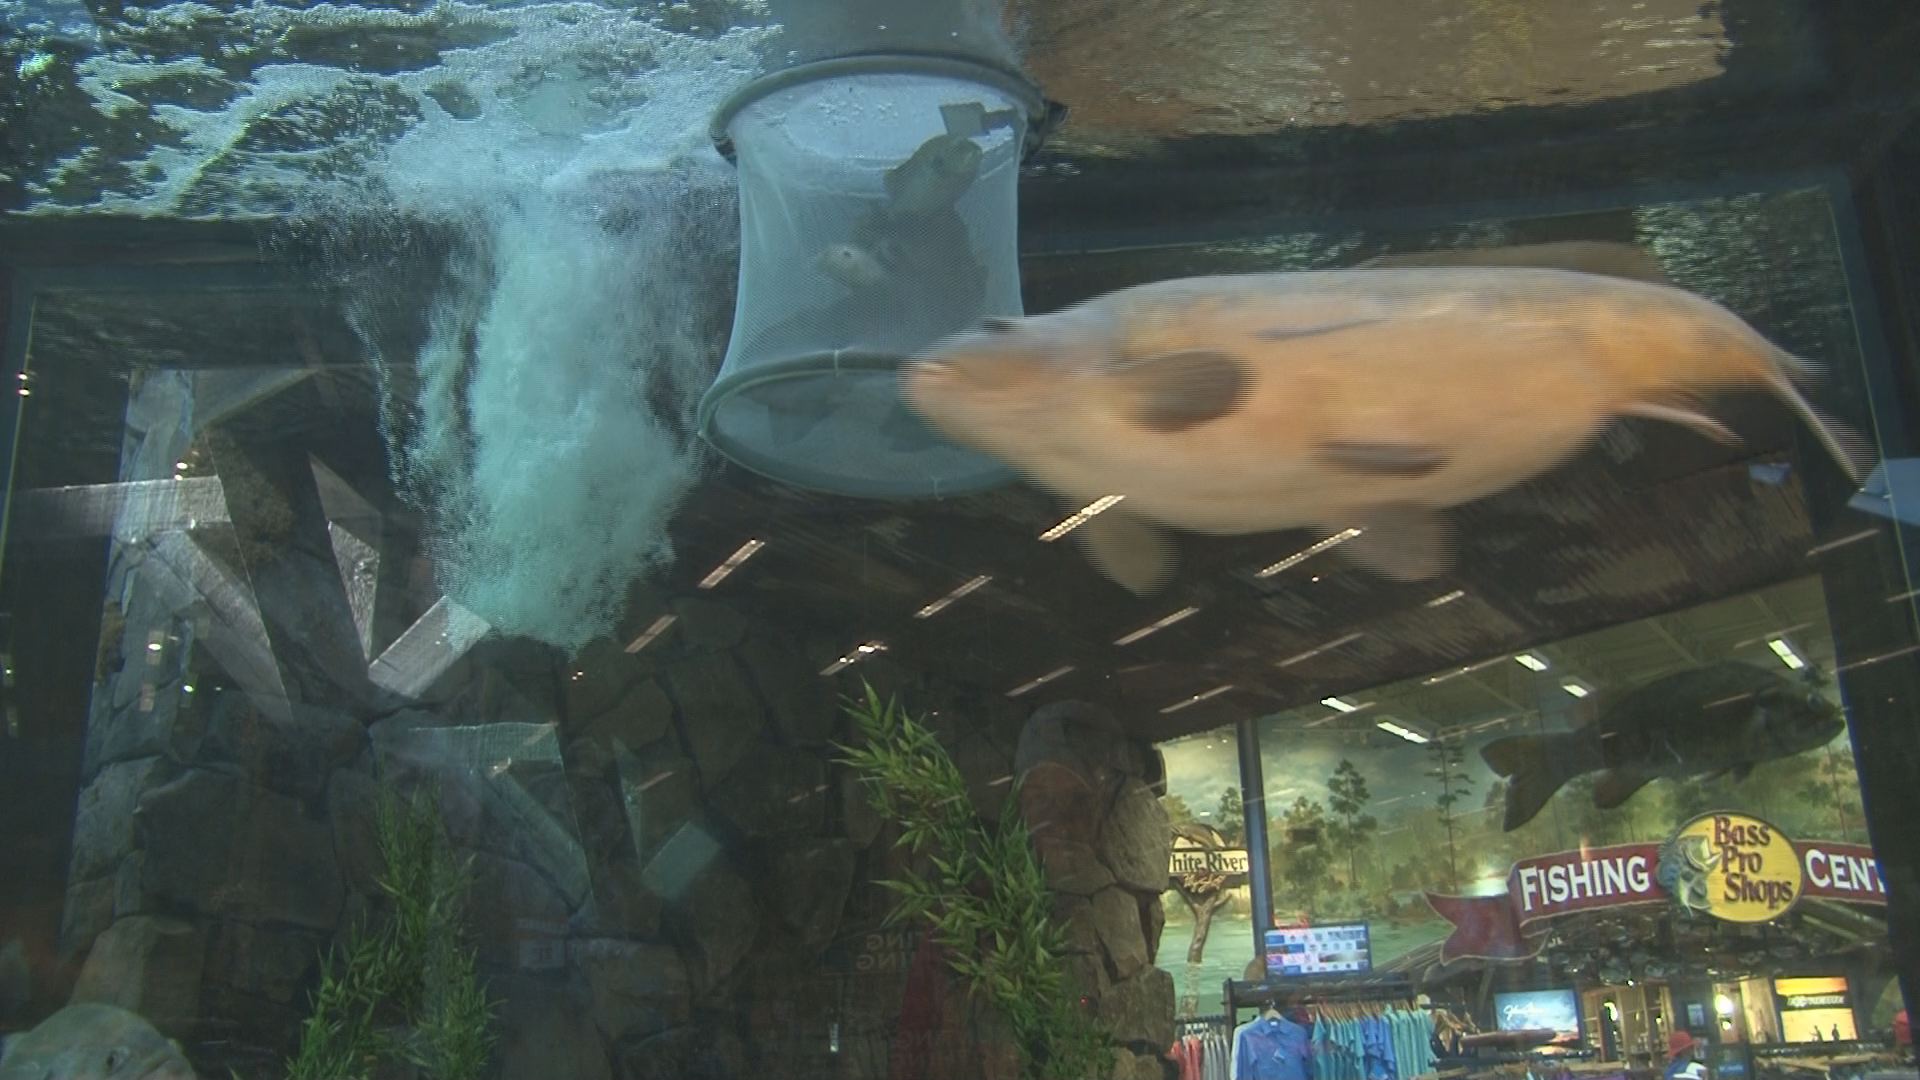 Bass Pro Shops release bream into indoor tank